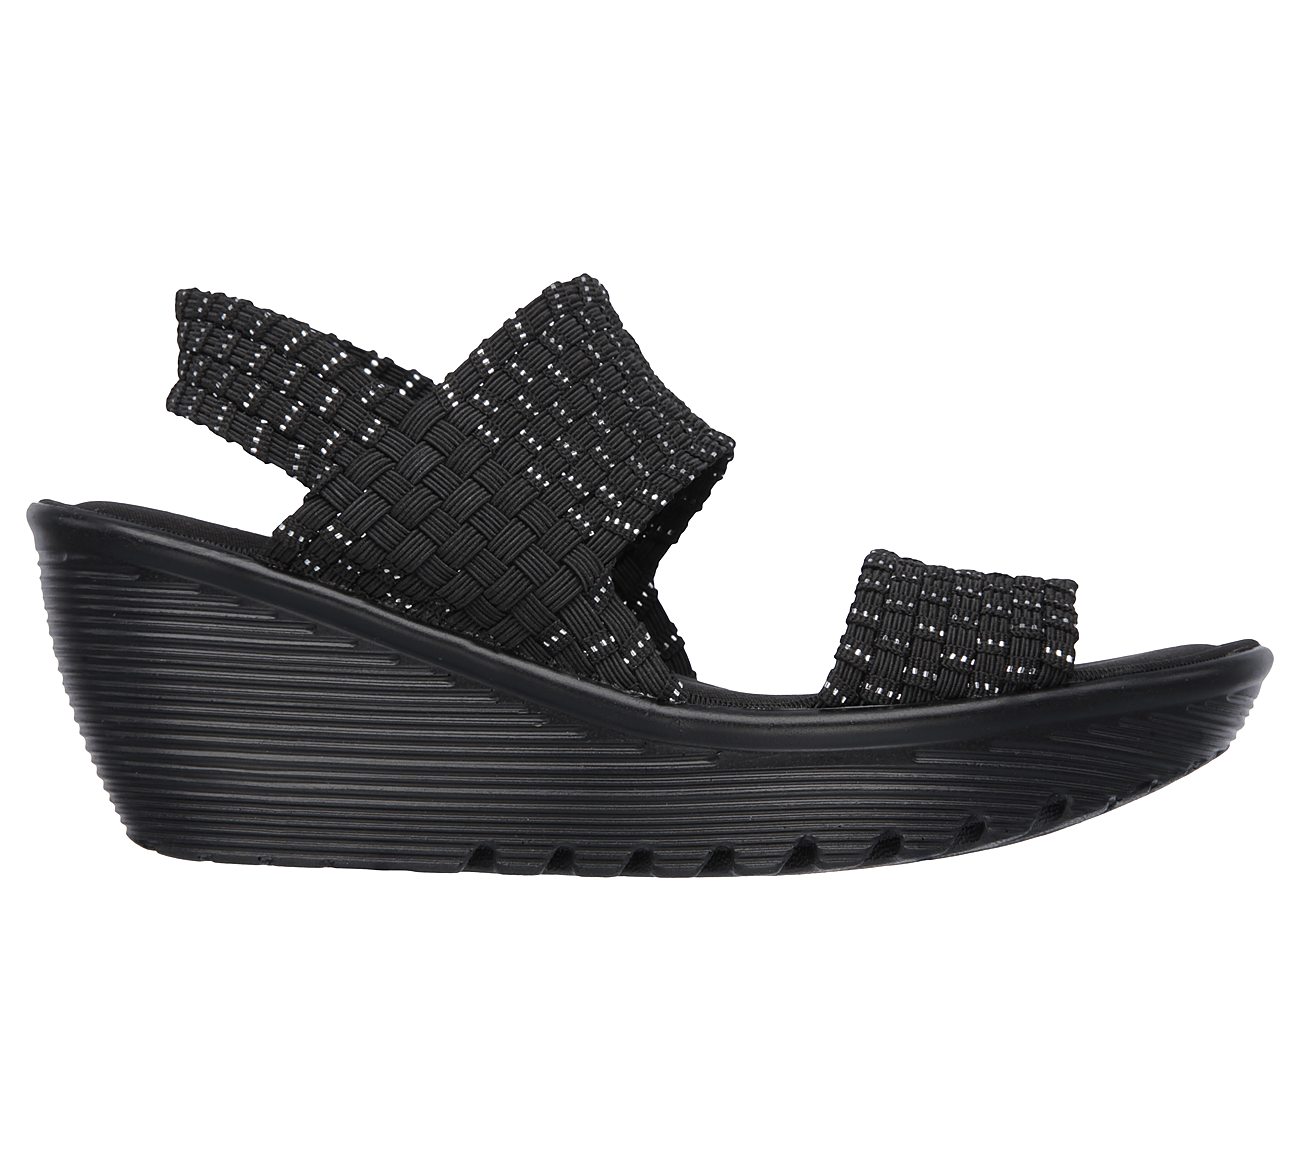 skechers stretch weave sandals off 66 